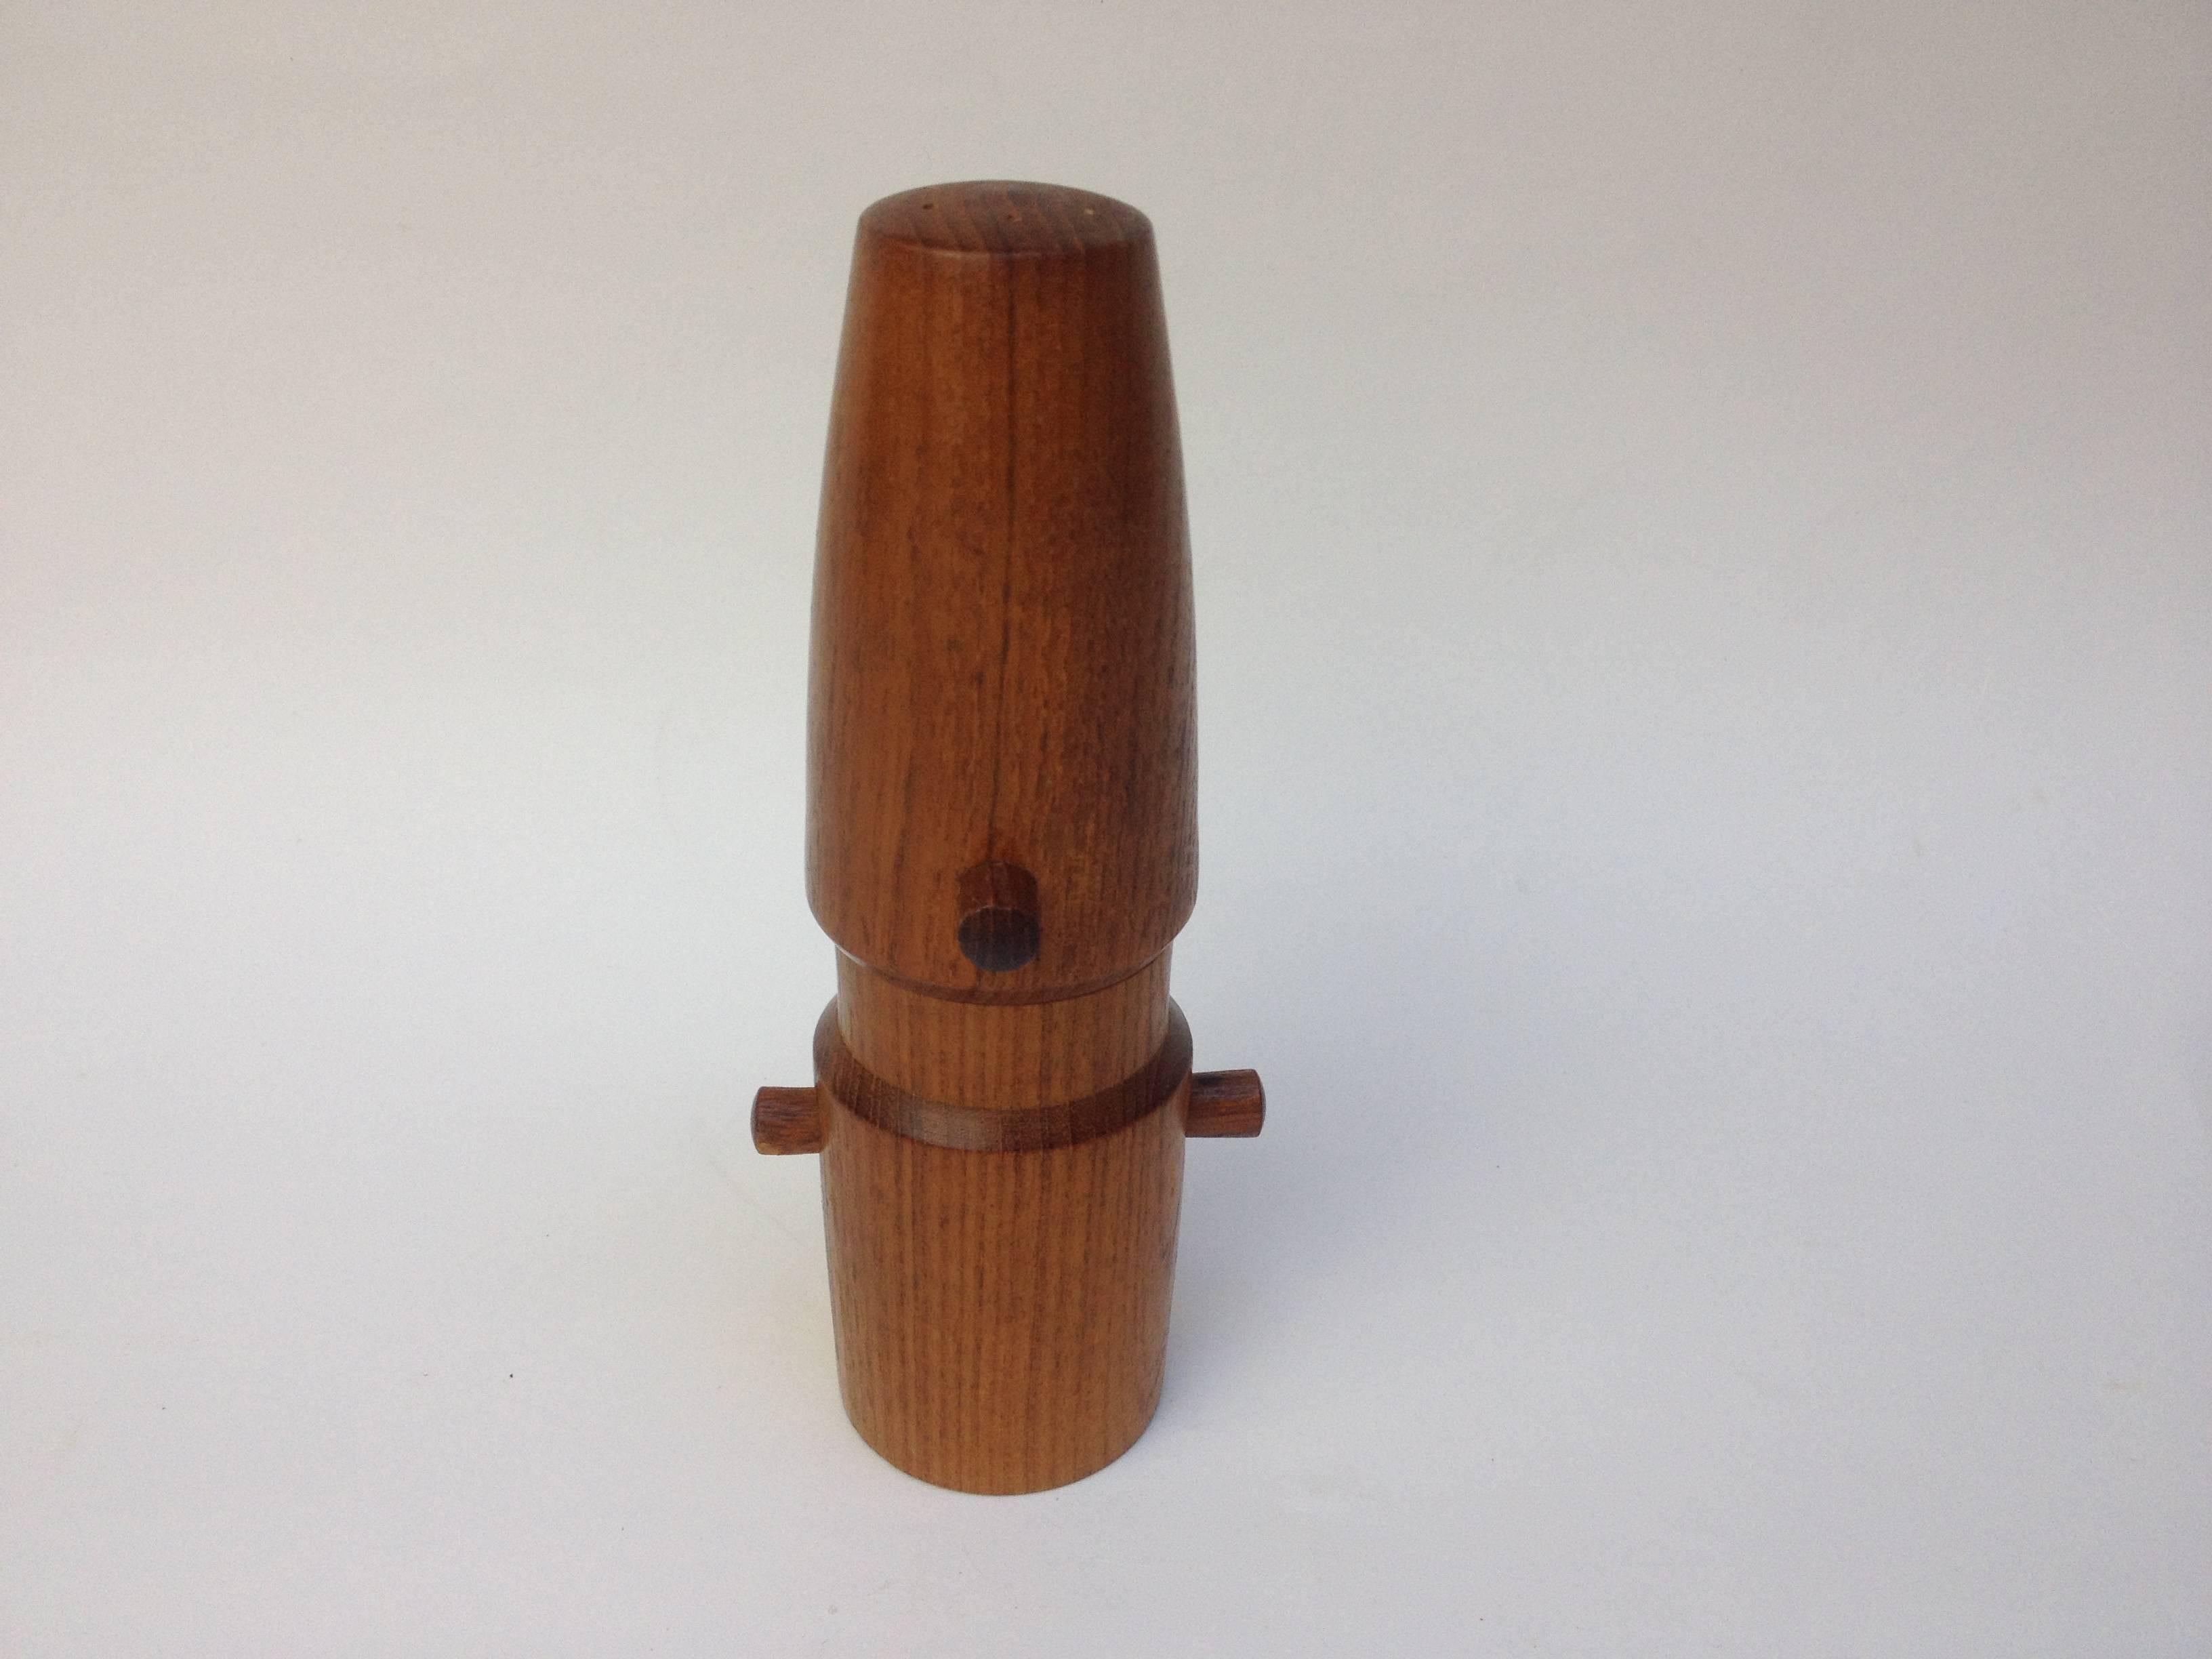 Dansk Teak Pepper Mill Designed by Jens Quistgaard, Made in Denmark In Good Condition For Sale In Victoria, British Columbia